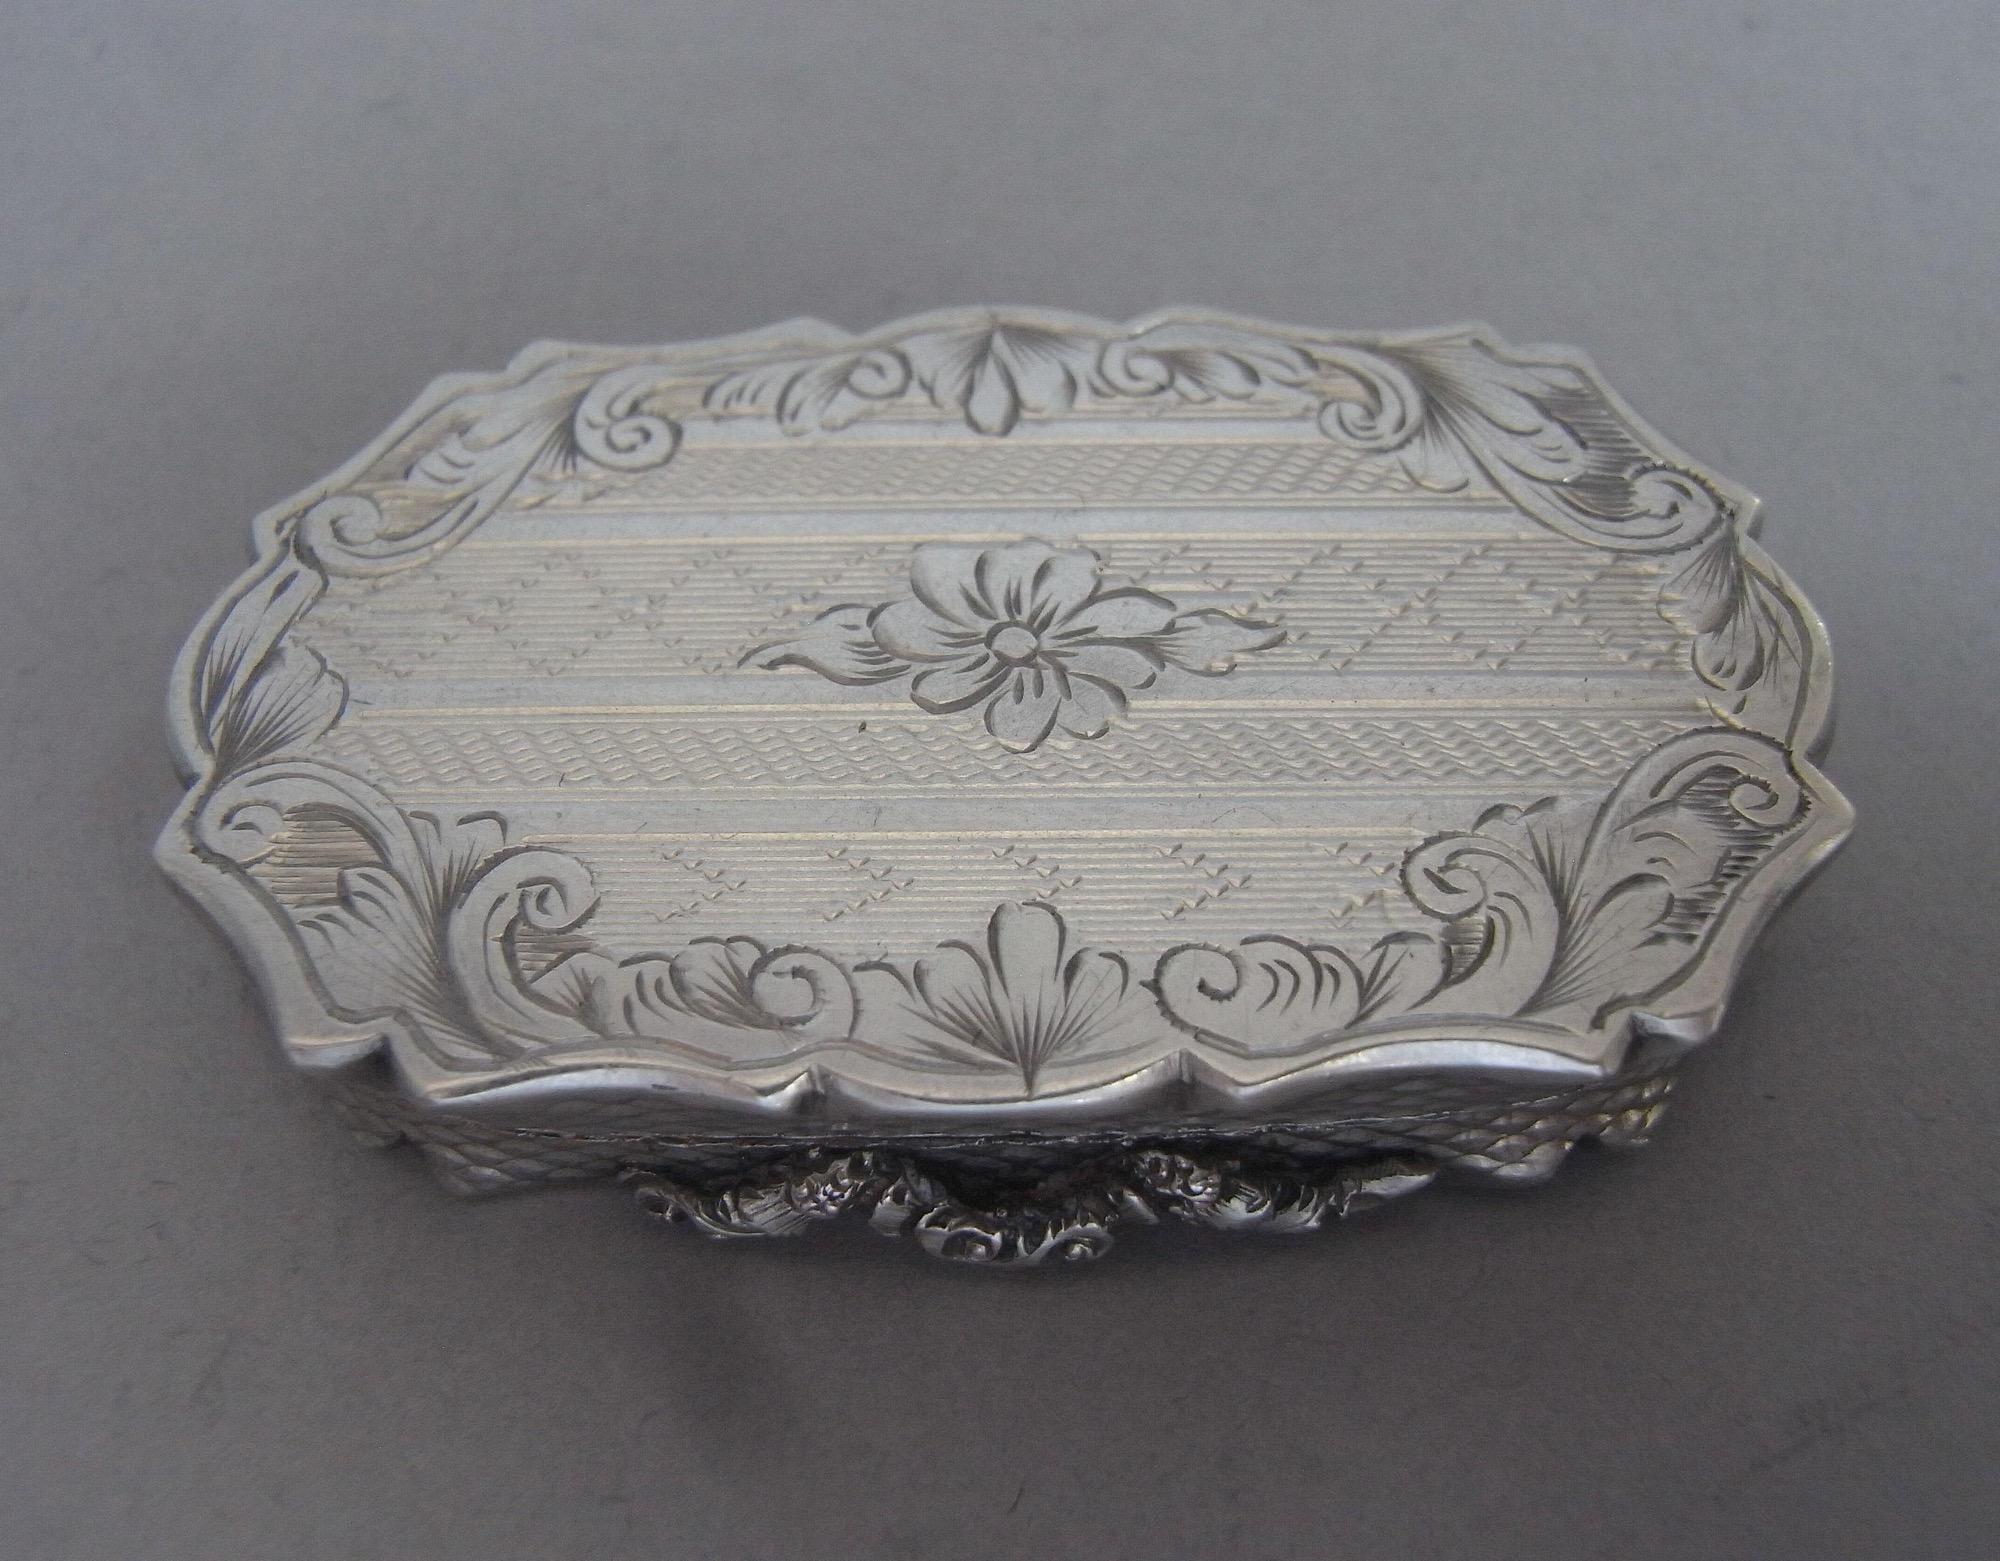 An unusual Vinaigrette made in Birmingham in 1848 by Francis Clarke.

The Vinaigrette is modelled in an unusual shaped rectangular form. The cover is engraved with an outer border of feathery scrolls enclosing a panel of various horizontal bands of